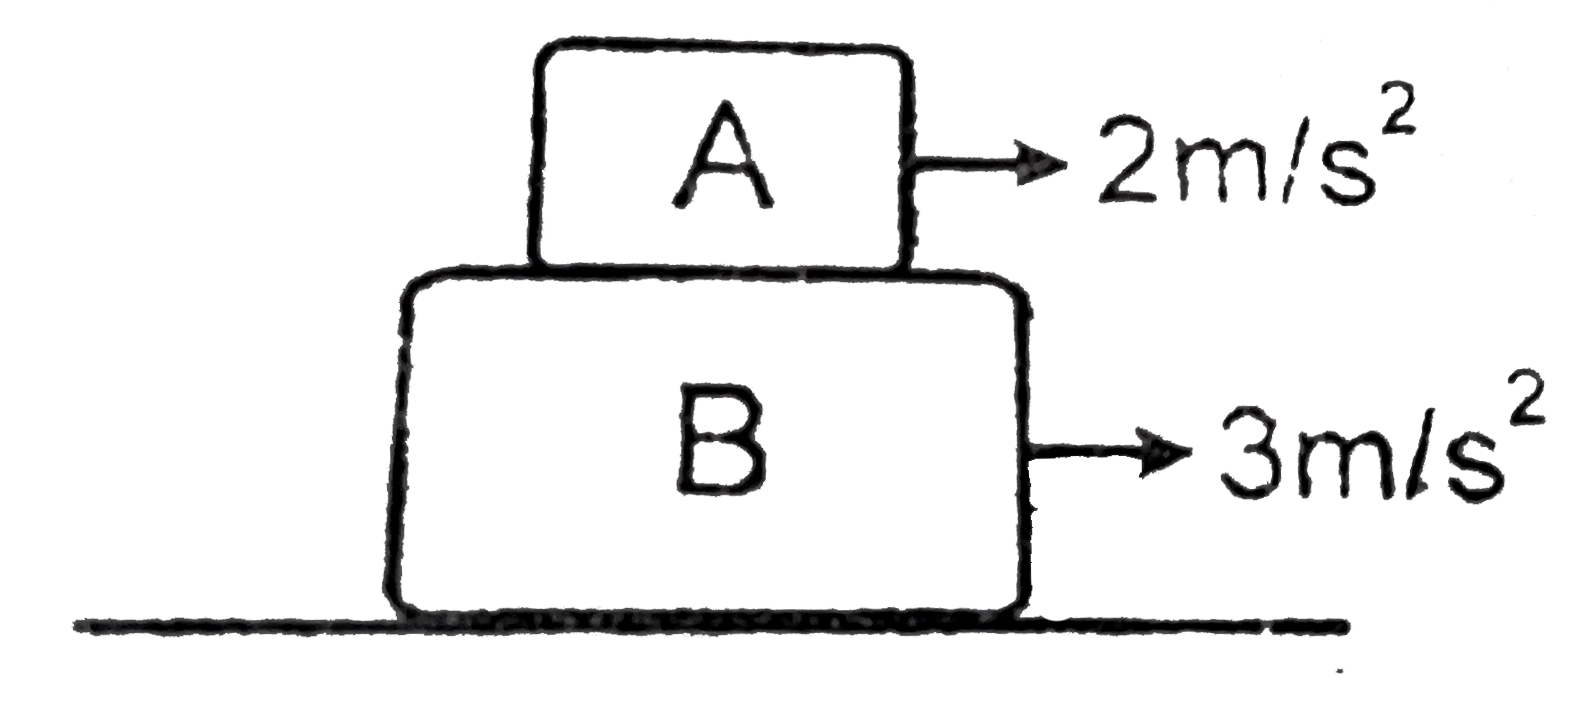 Block A is kept on block B as shown in figure. It is known that acceleration of block A is 2 m//s^(2) towards right and acceleration of block B is 3 m//s^(2) towards right under the effect of unknown forces. Direction of friction force acting on A by B (mu(AB) = 0.3)